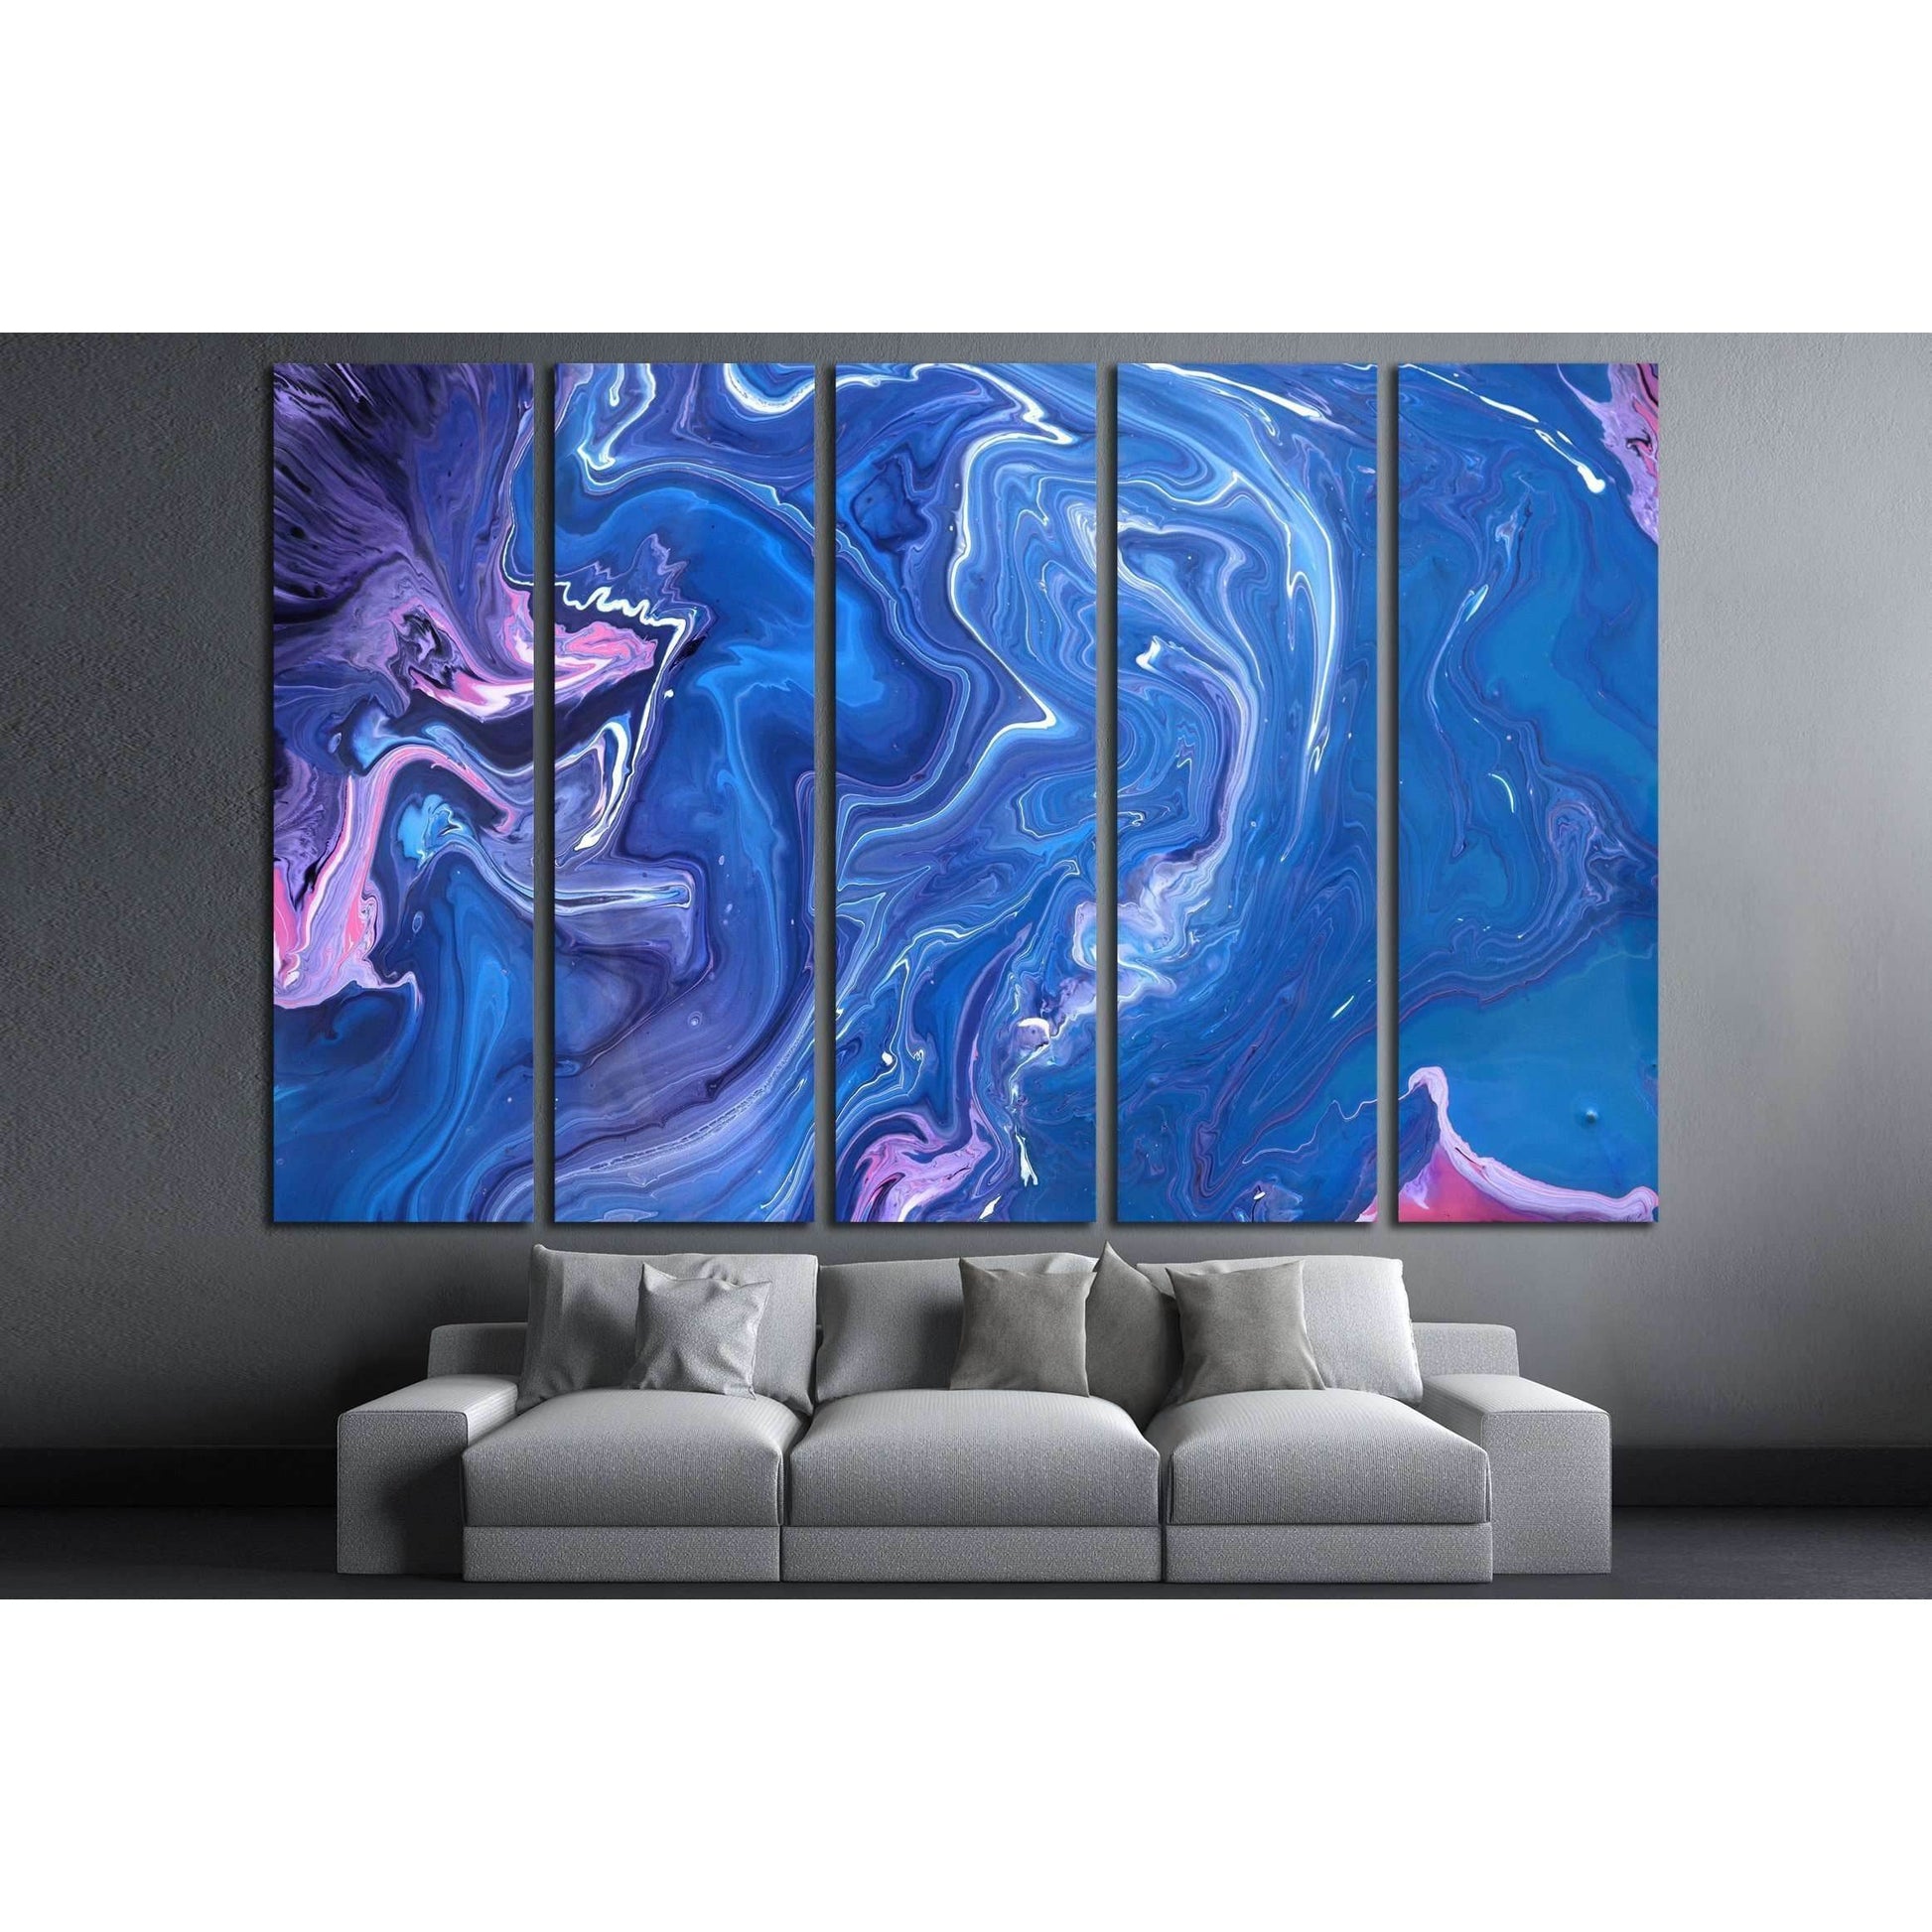 Blue Marble Canvas Print for Office DecorDecorate your walls with a stunning Blue Marble Canvas Art Print from the world's largest art gallery. Choose from thousands of Marble artworks with various sizing options. Choose your perfect art print to complete